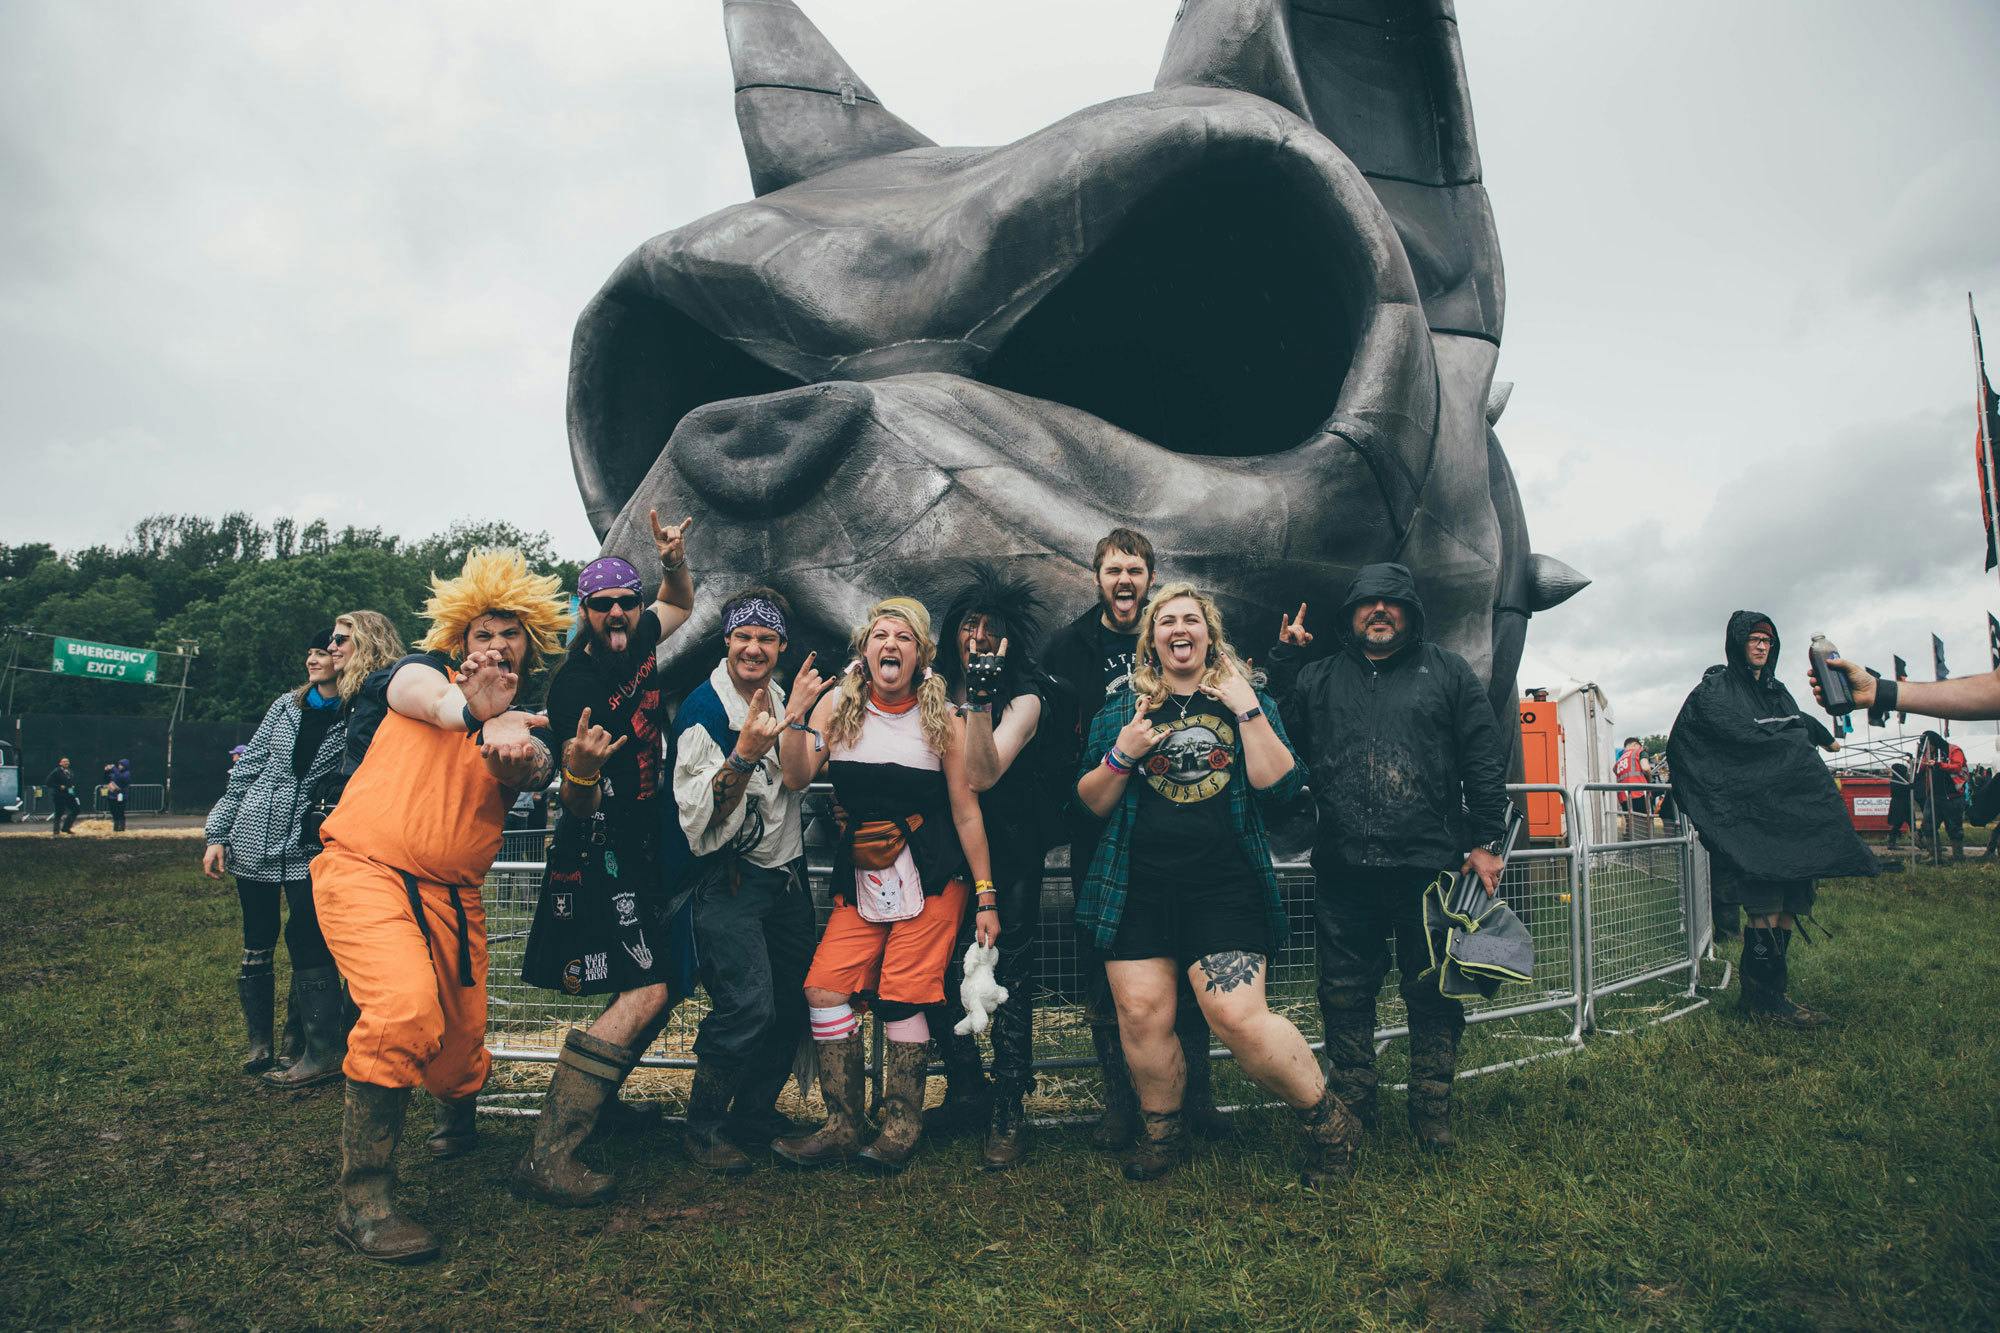 In Pictures: The Hair Metal Fans Of Download Festival